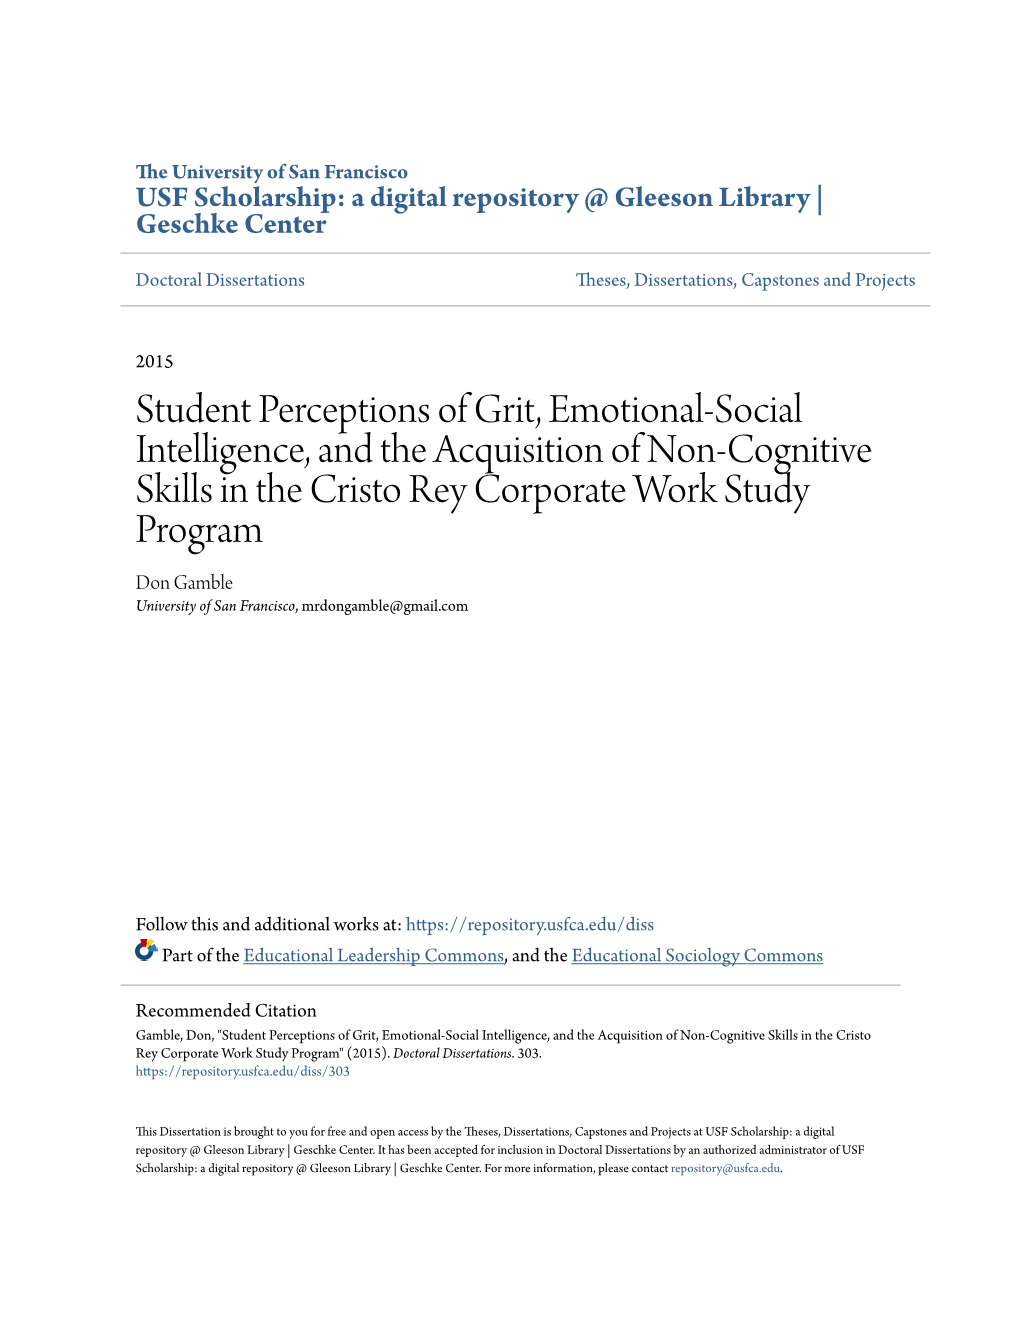 Student Perceptions of Grit, Emotional-Social Intelligence, And